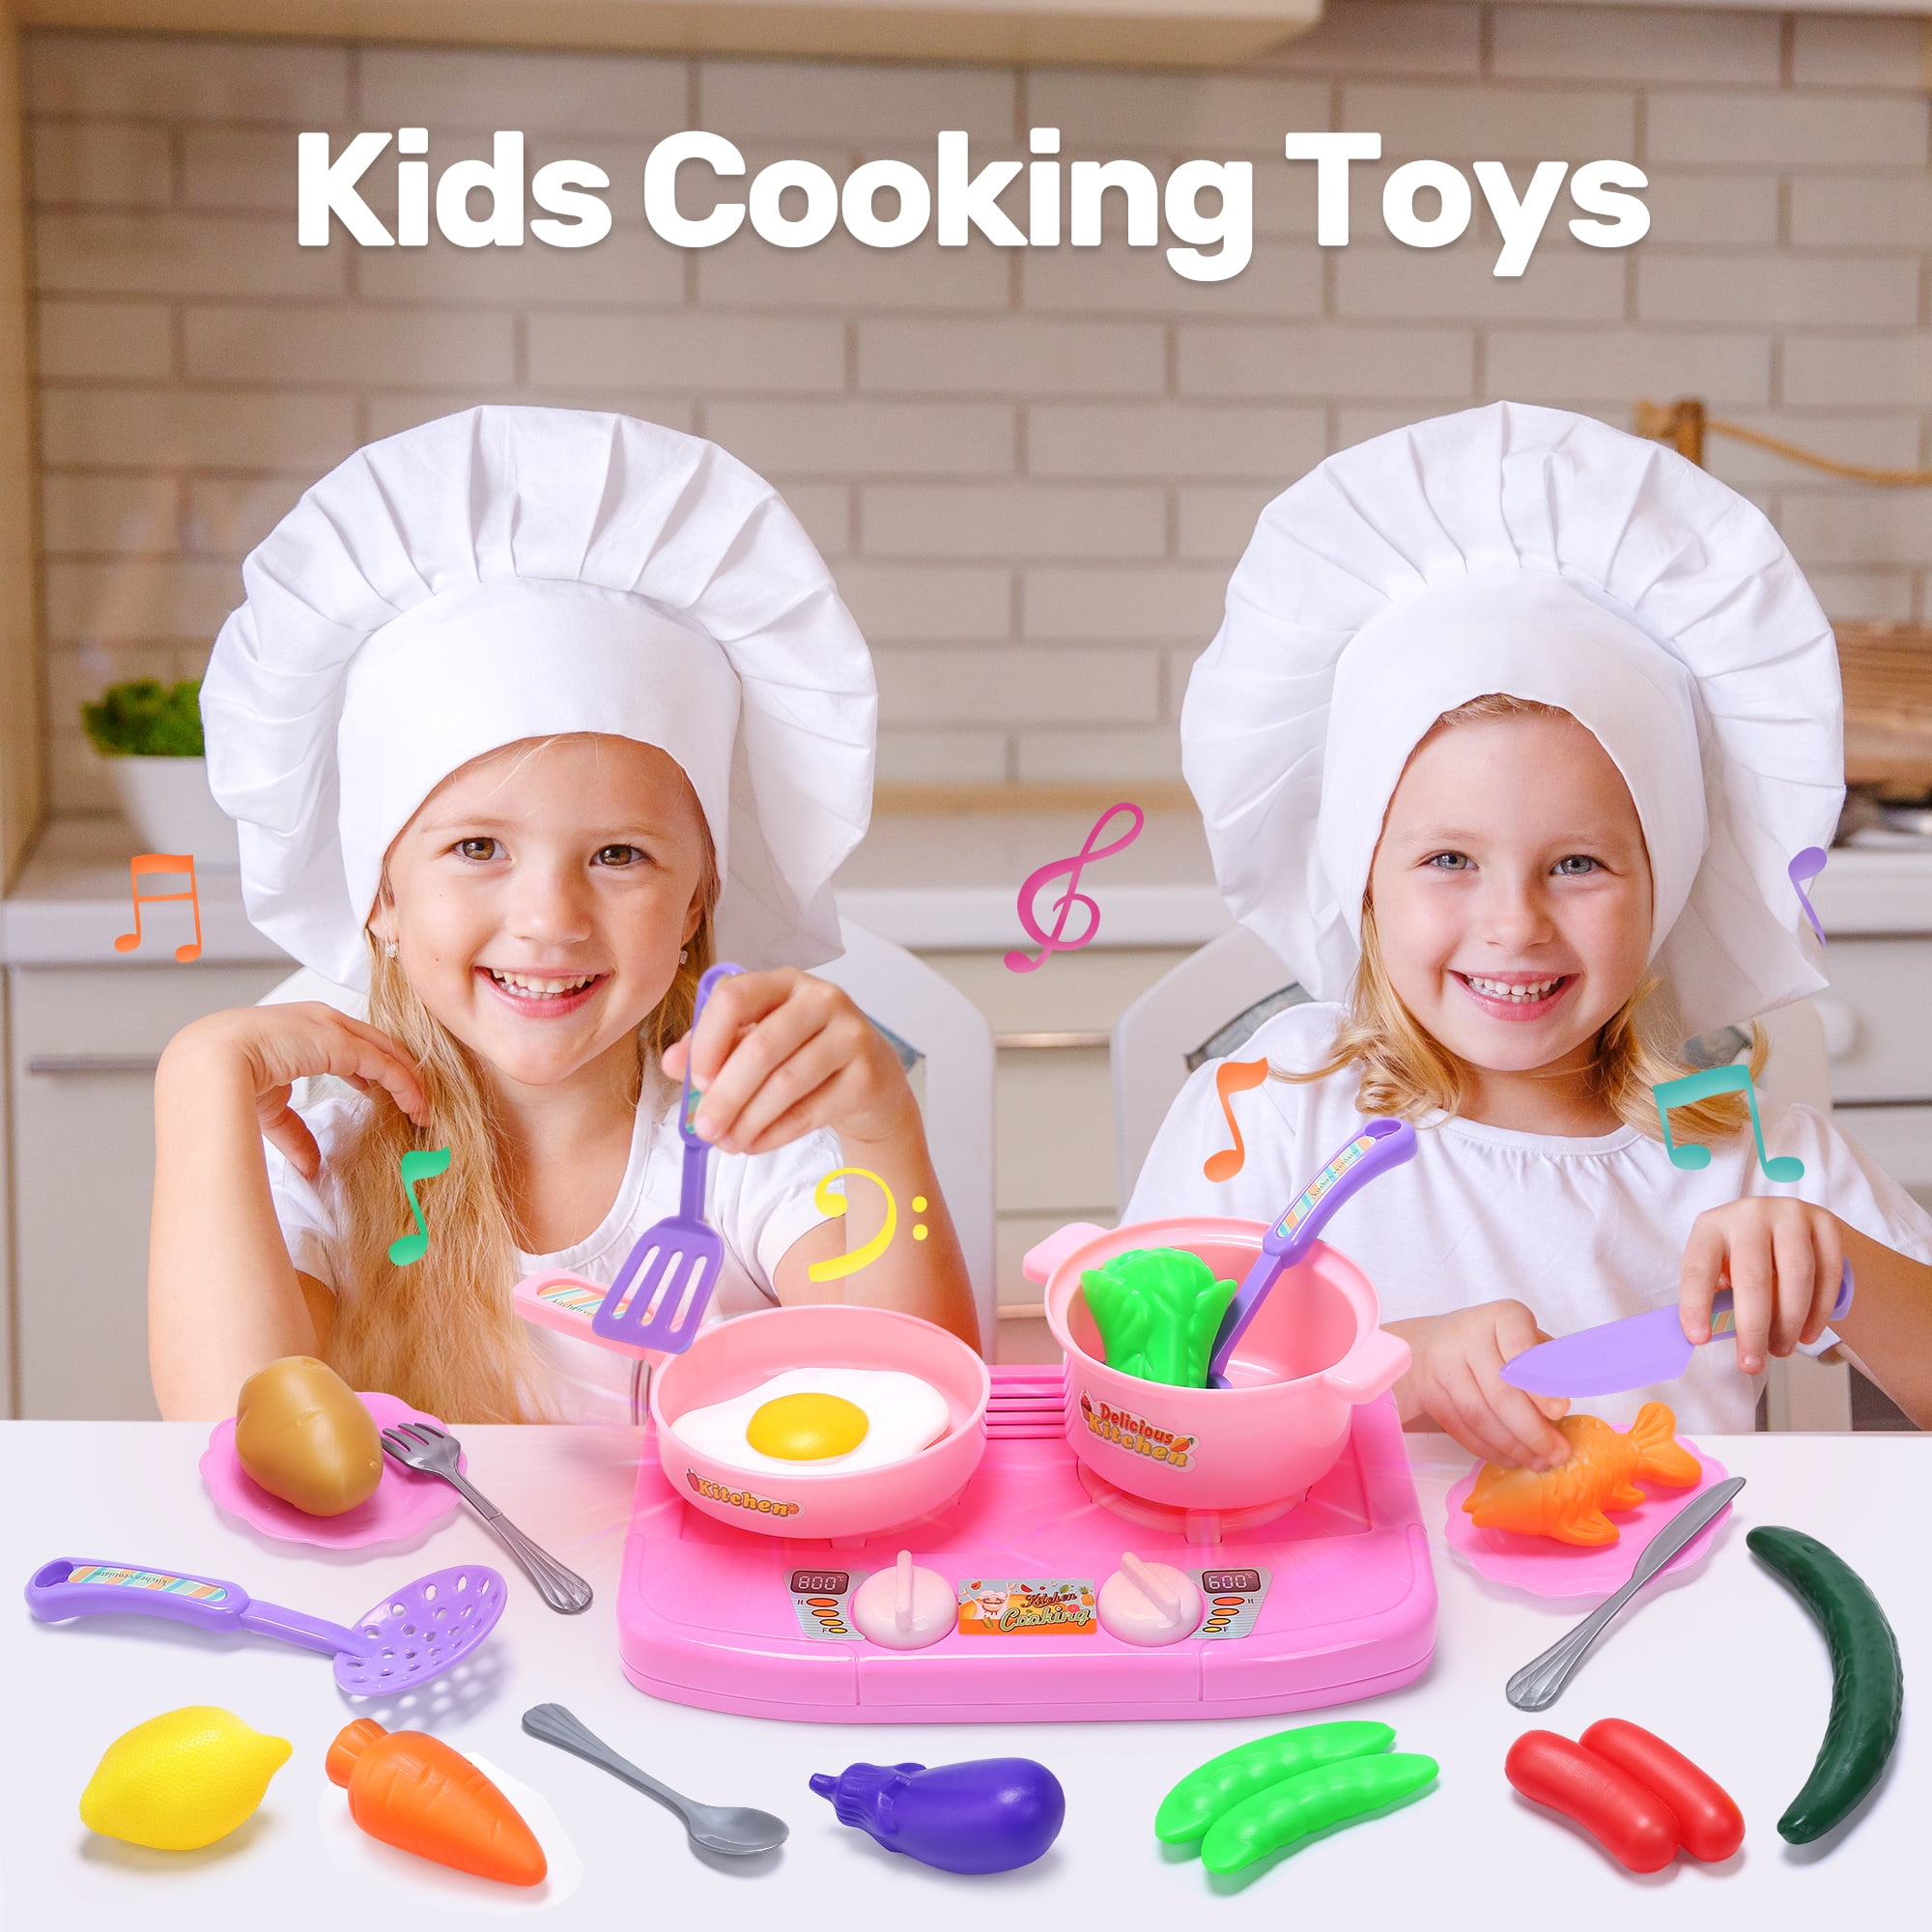 Best Cooking Gifts for Kids - Toddler Approved